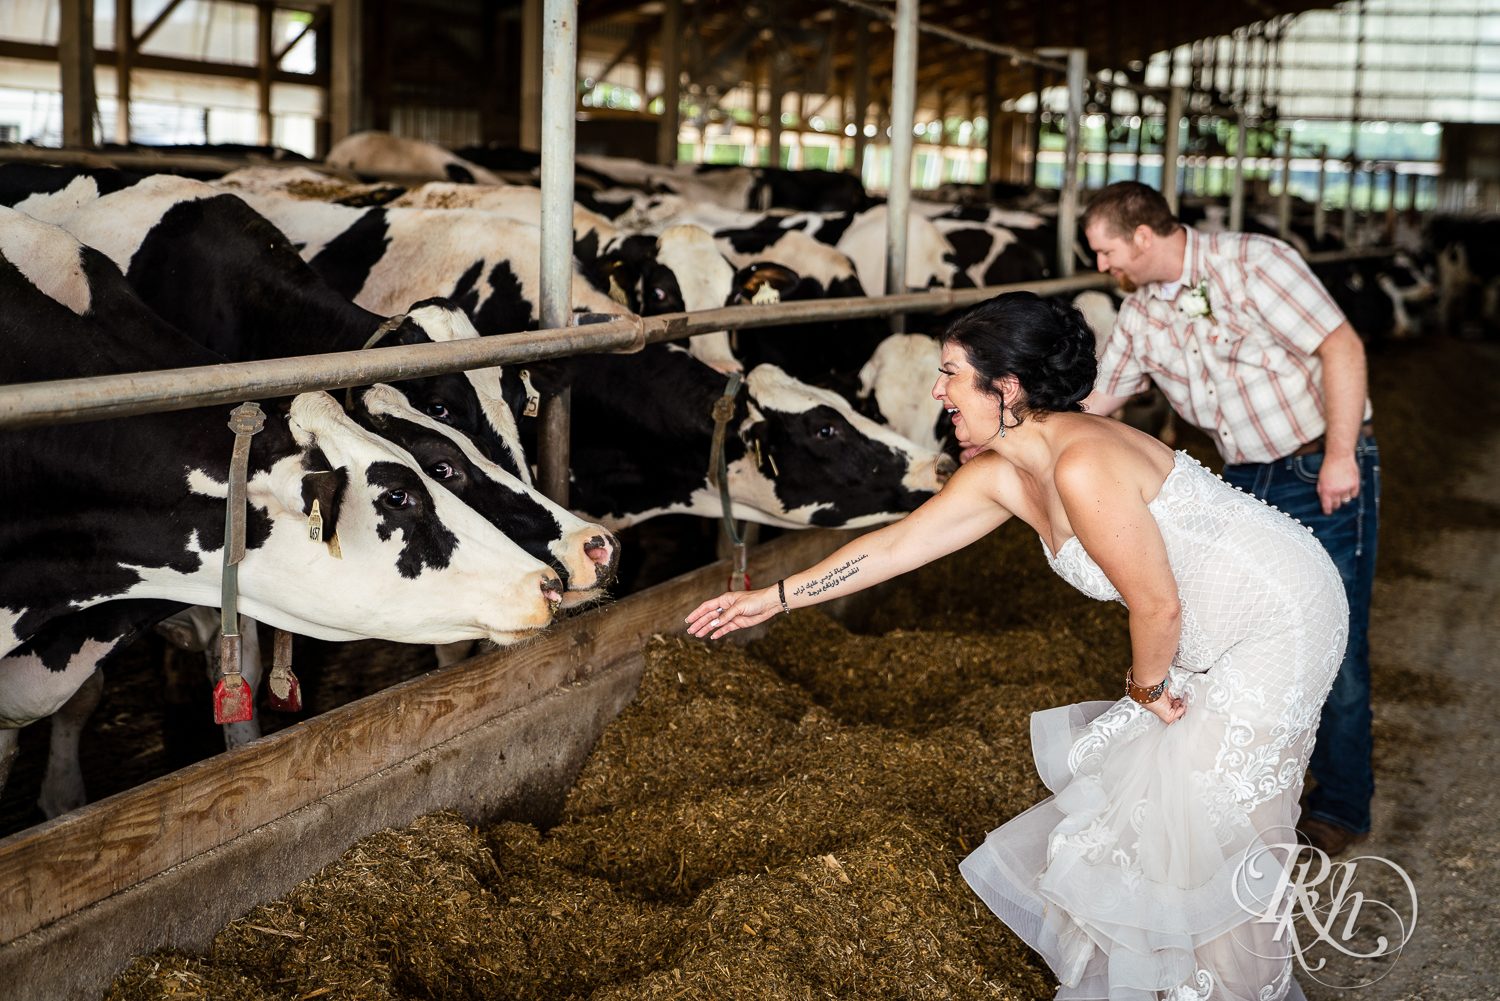 Bride and groom play with cows on either side of them at Croix View Farm in Osceola, Wisconsin.